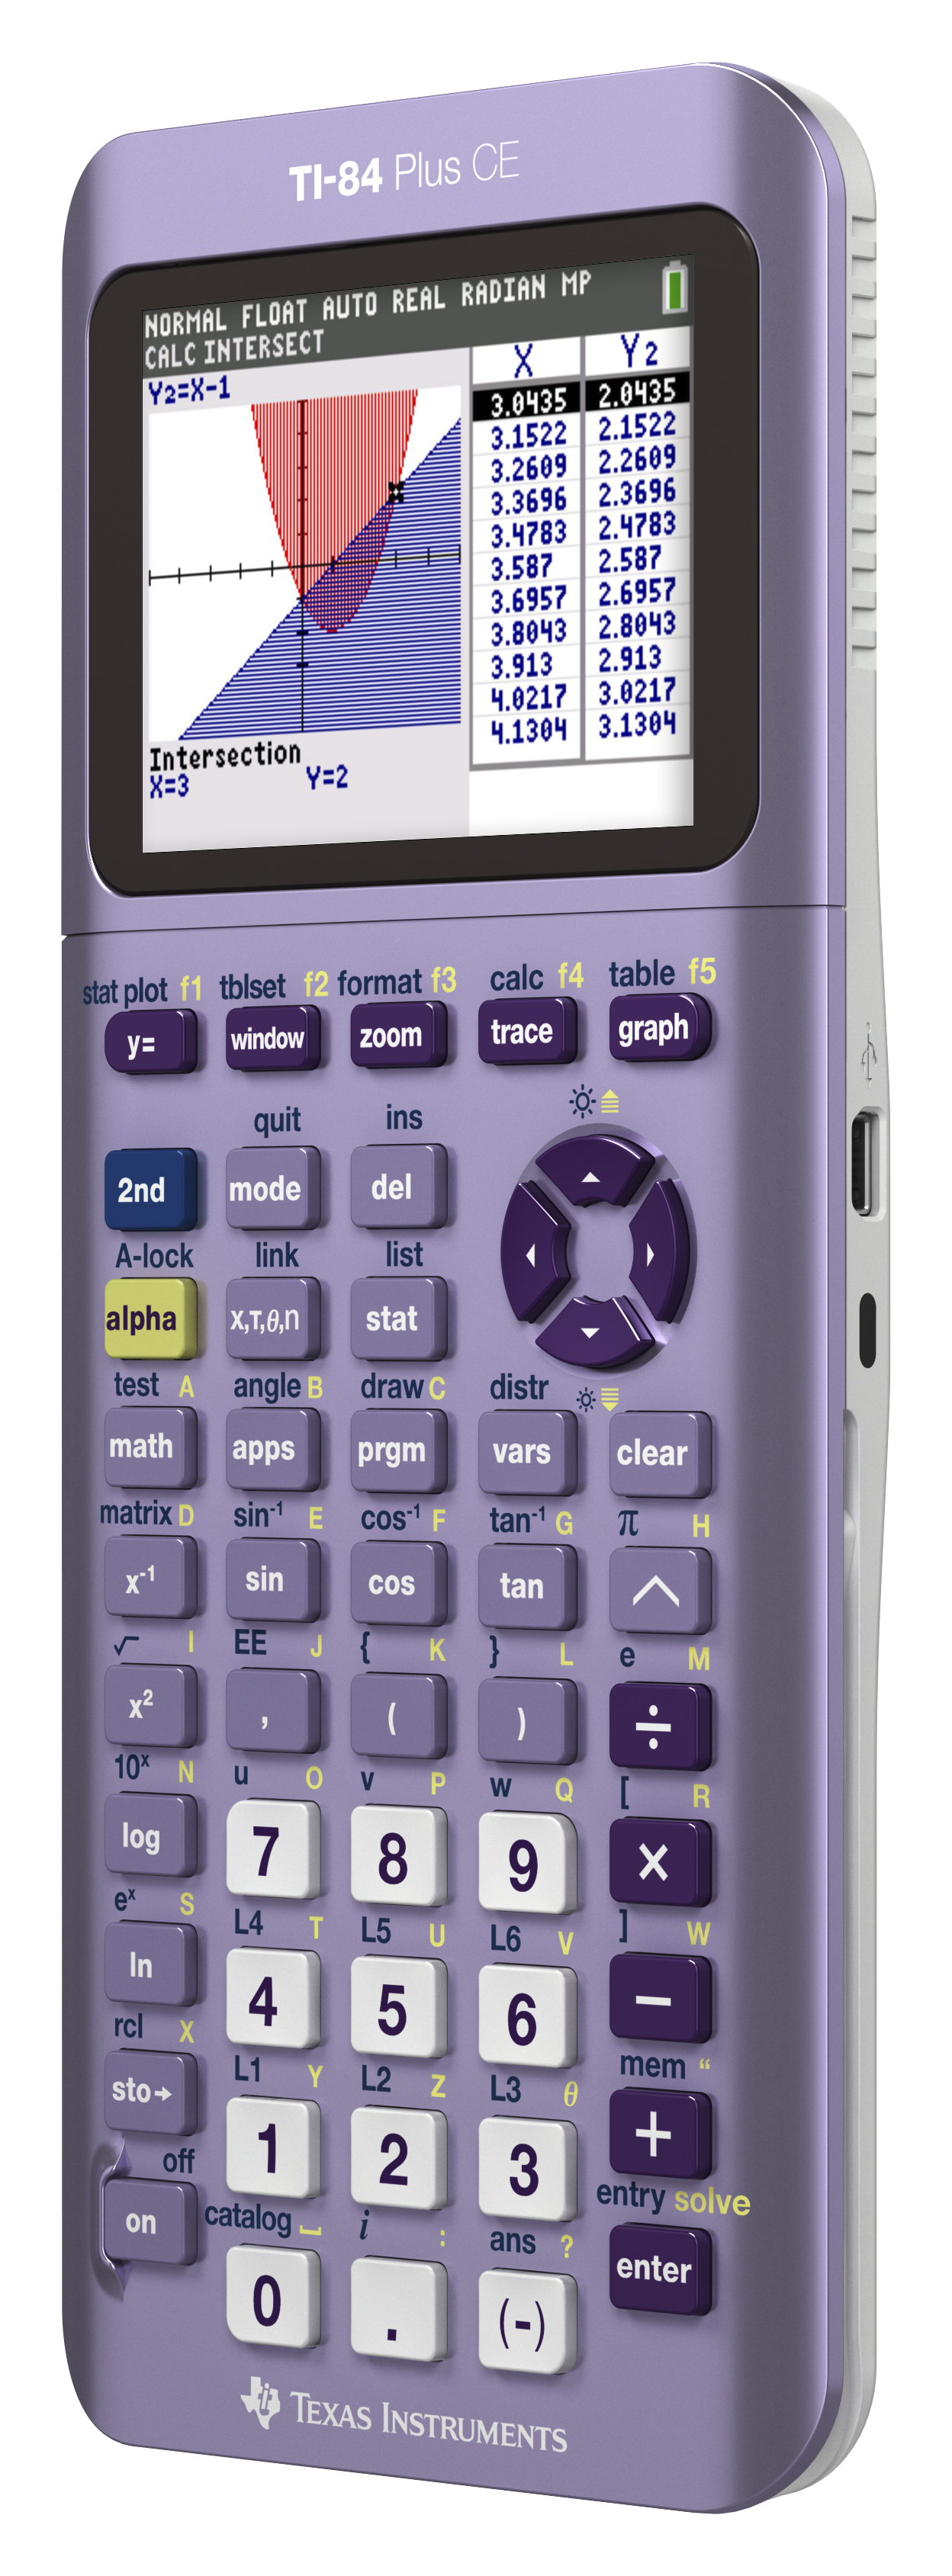 Texas Instruments Purple TI-84 Plus CE Graphing Calculator - image 3 of 4